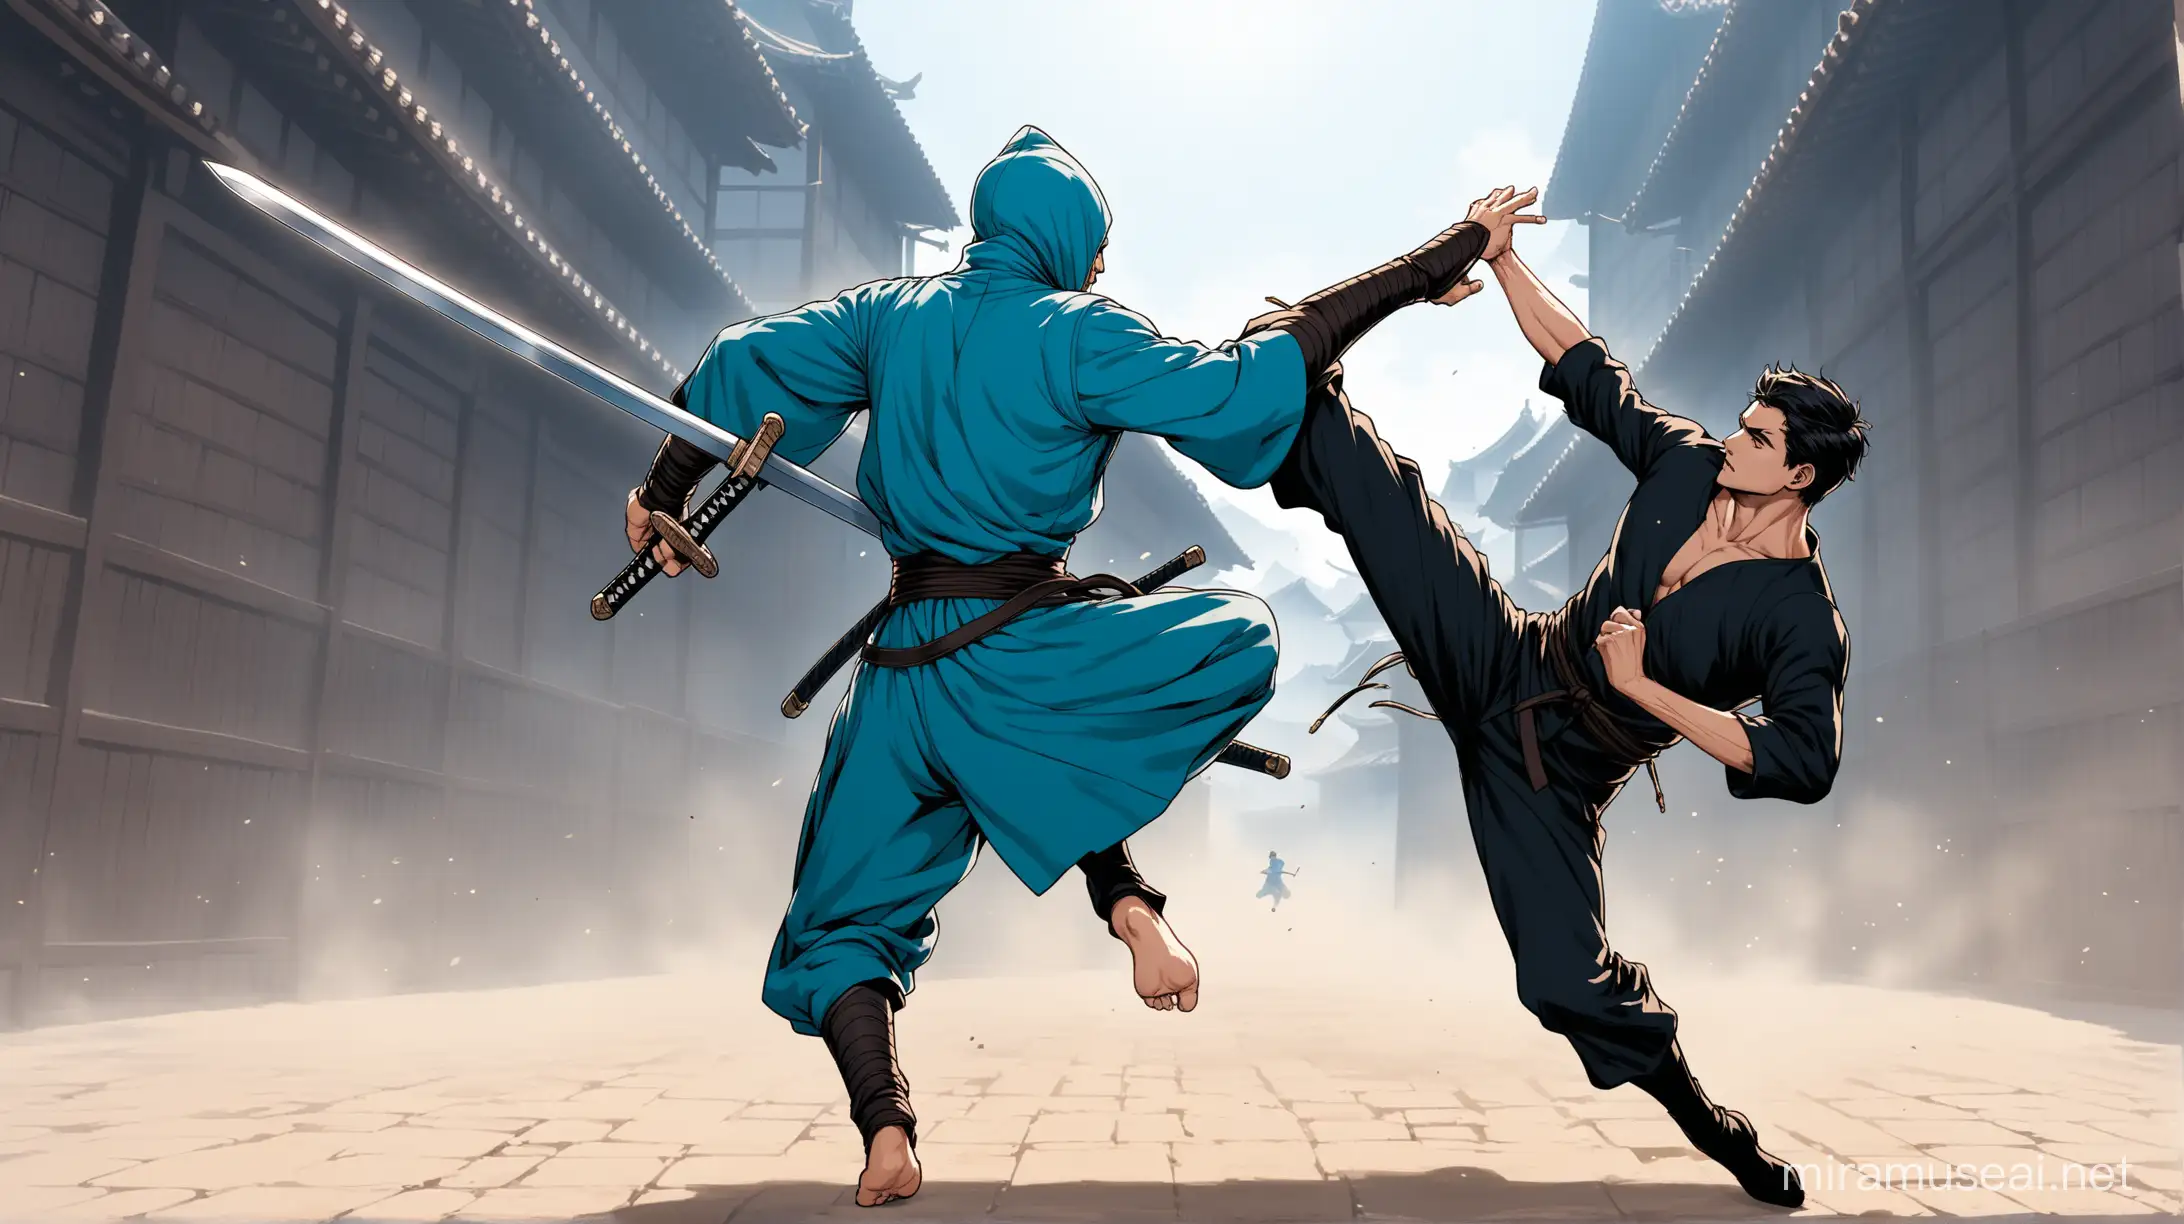 The swordsman in blue jumped and spun his leg while kicking right into the chest of the one wearing black